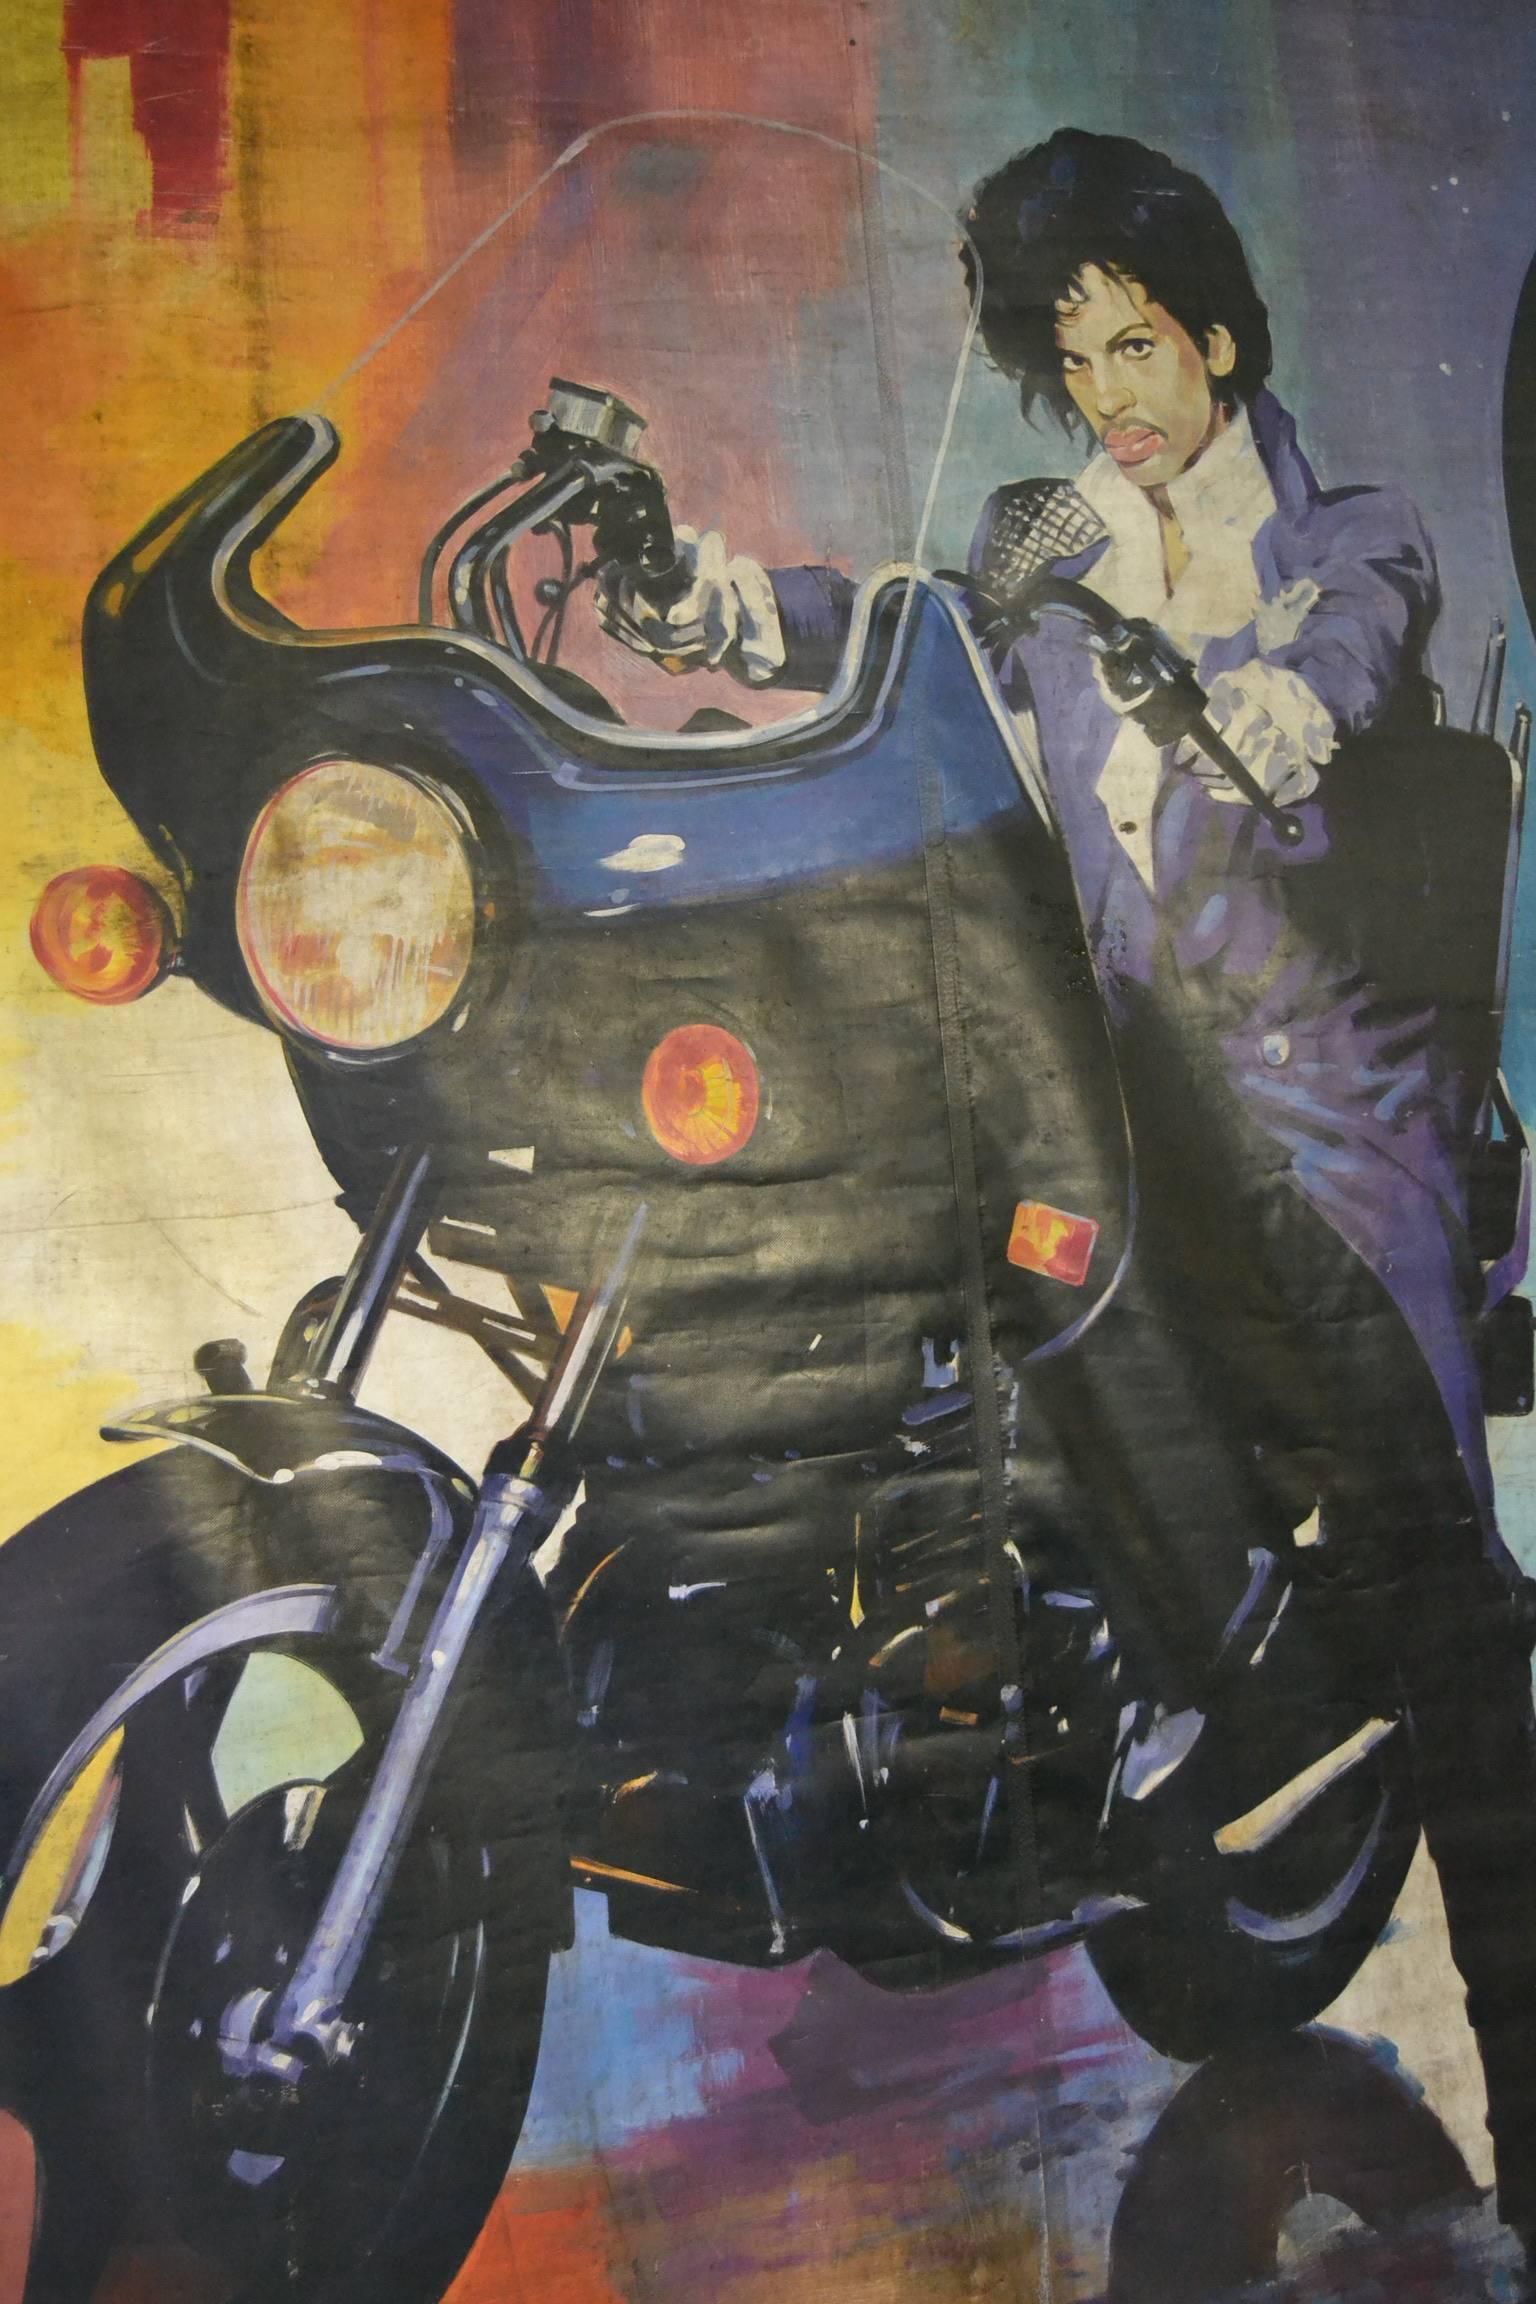 Spectacular carnivabanner with the legendary Singers Prince, Tina Turner and Fats Domino Or Percy Sledge (?)
These iconic artists - Singers are well known by every age, young and old. 
You can see Prince here at his motorbike, a typical image for